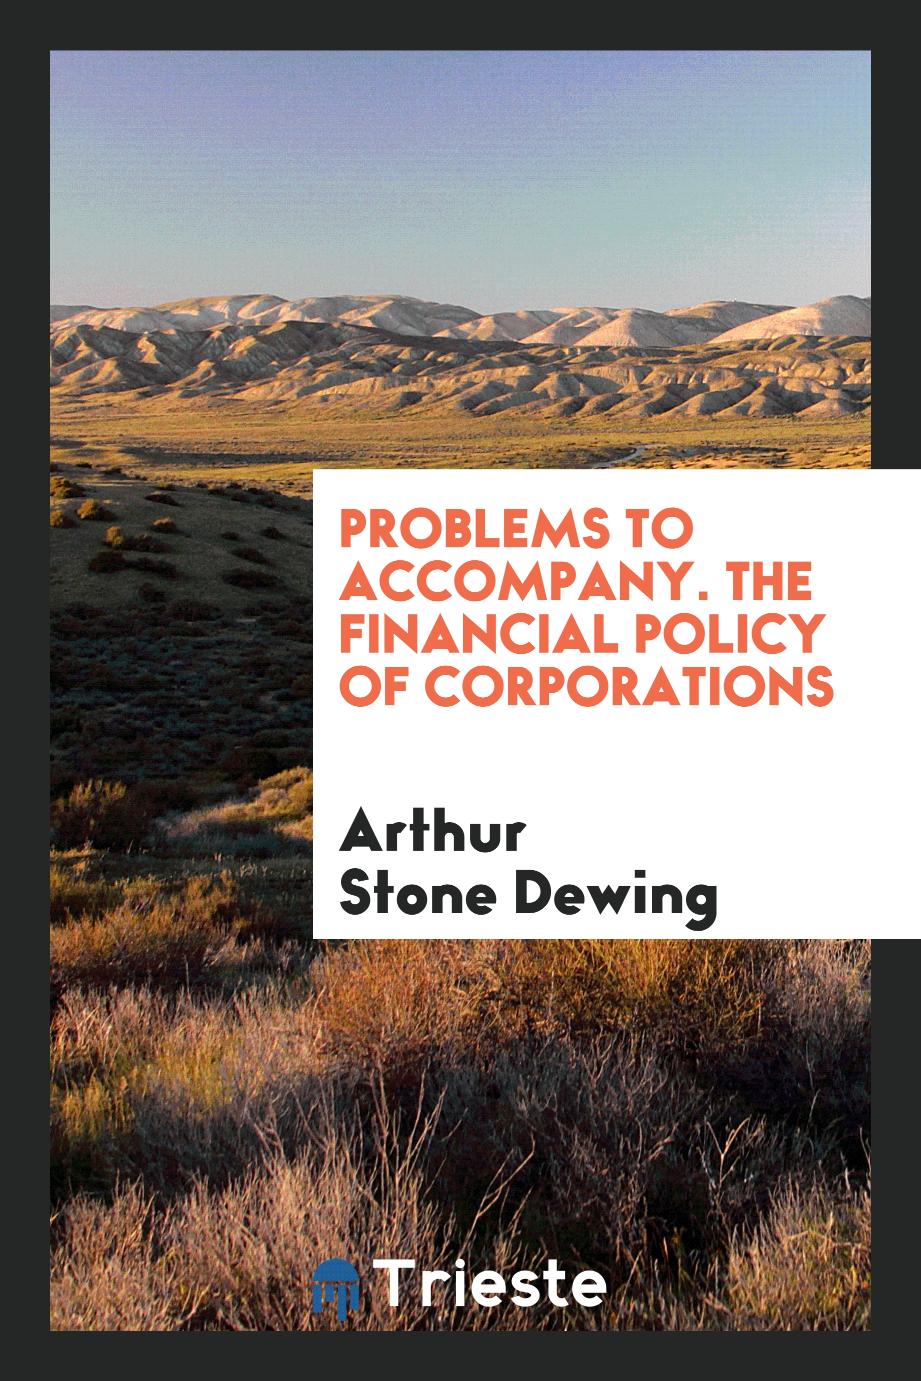 Problems to Accompany. The Financial Policy of Corporations